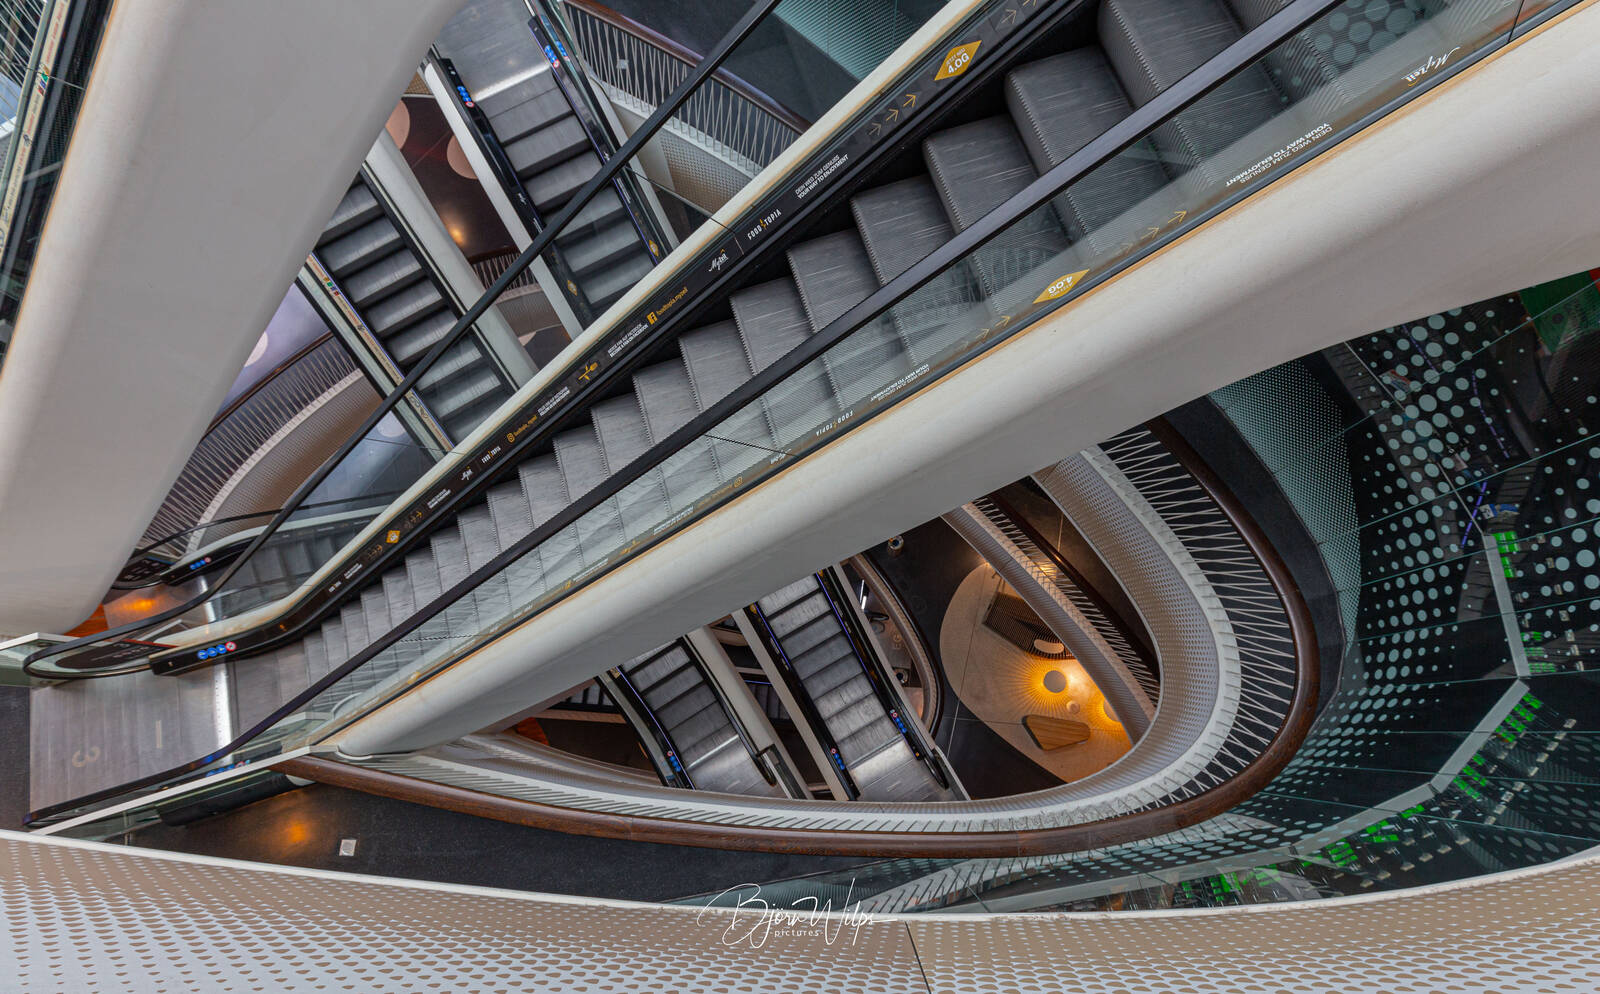 Image of MyZeil shopping mall by Bjoern Wilps